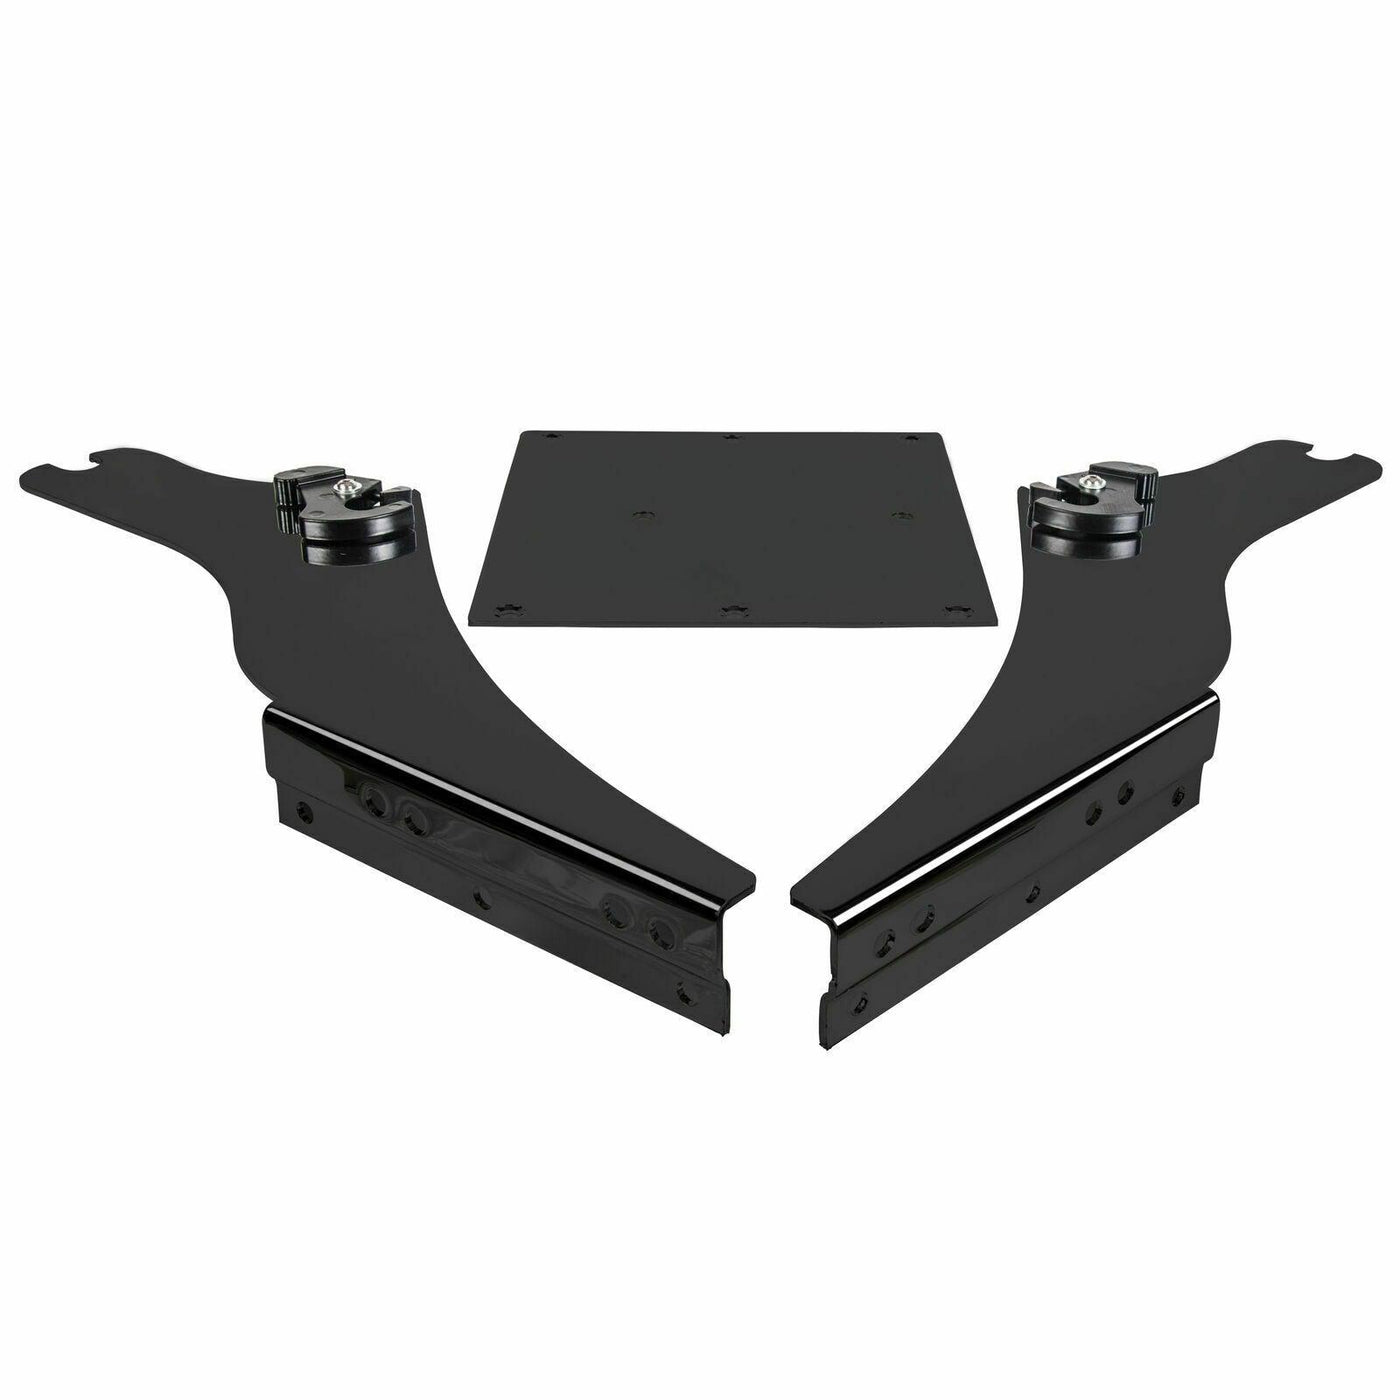 King /Razor /Chopped Tour Pack Pak Trunk Mount Rack For 97-08 Harley Touring - Moto Life Products